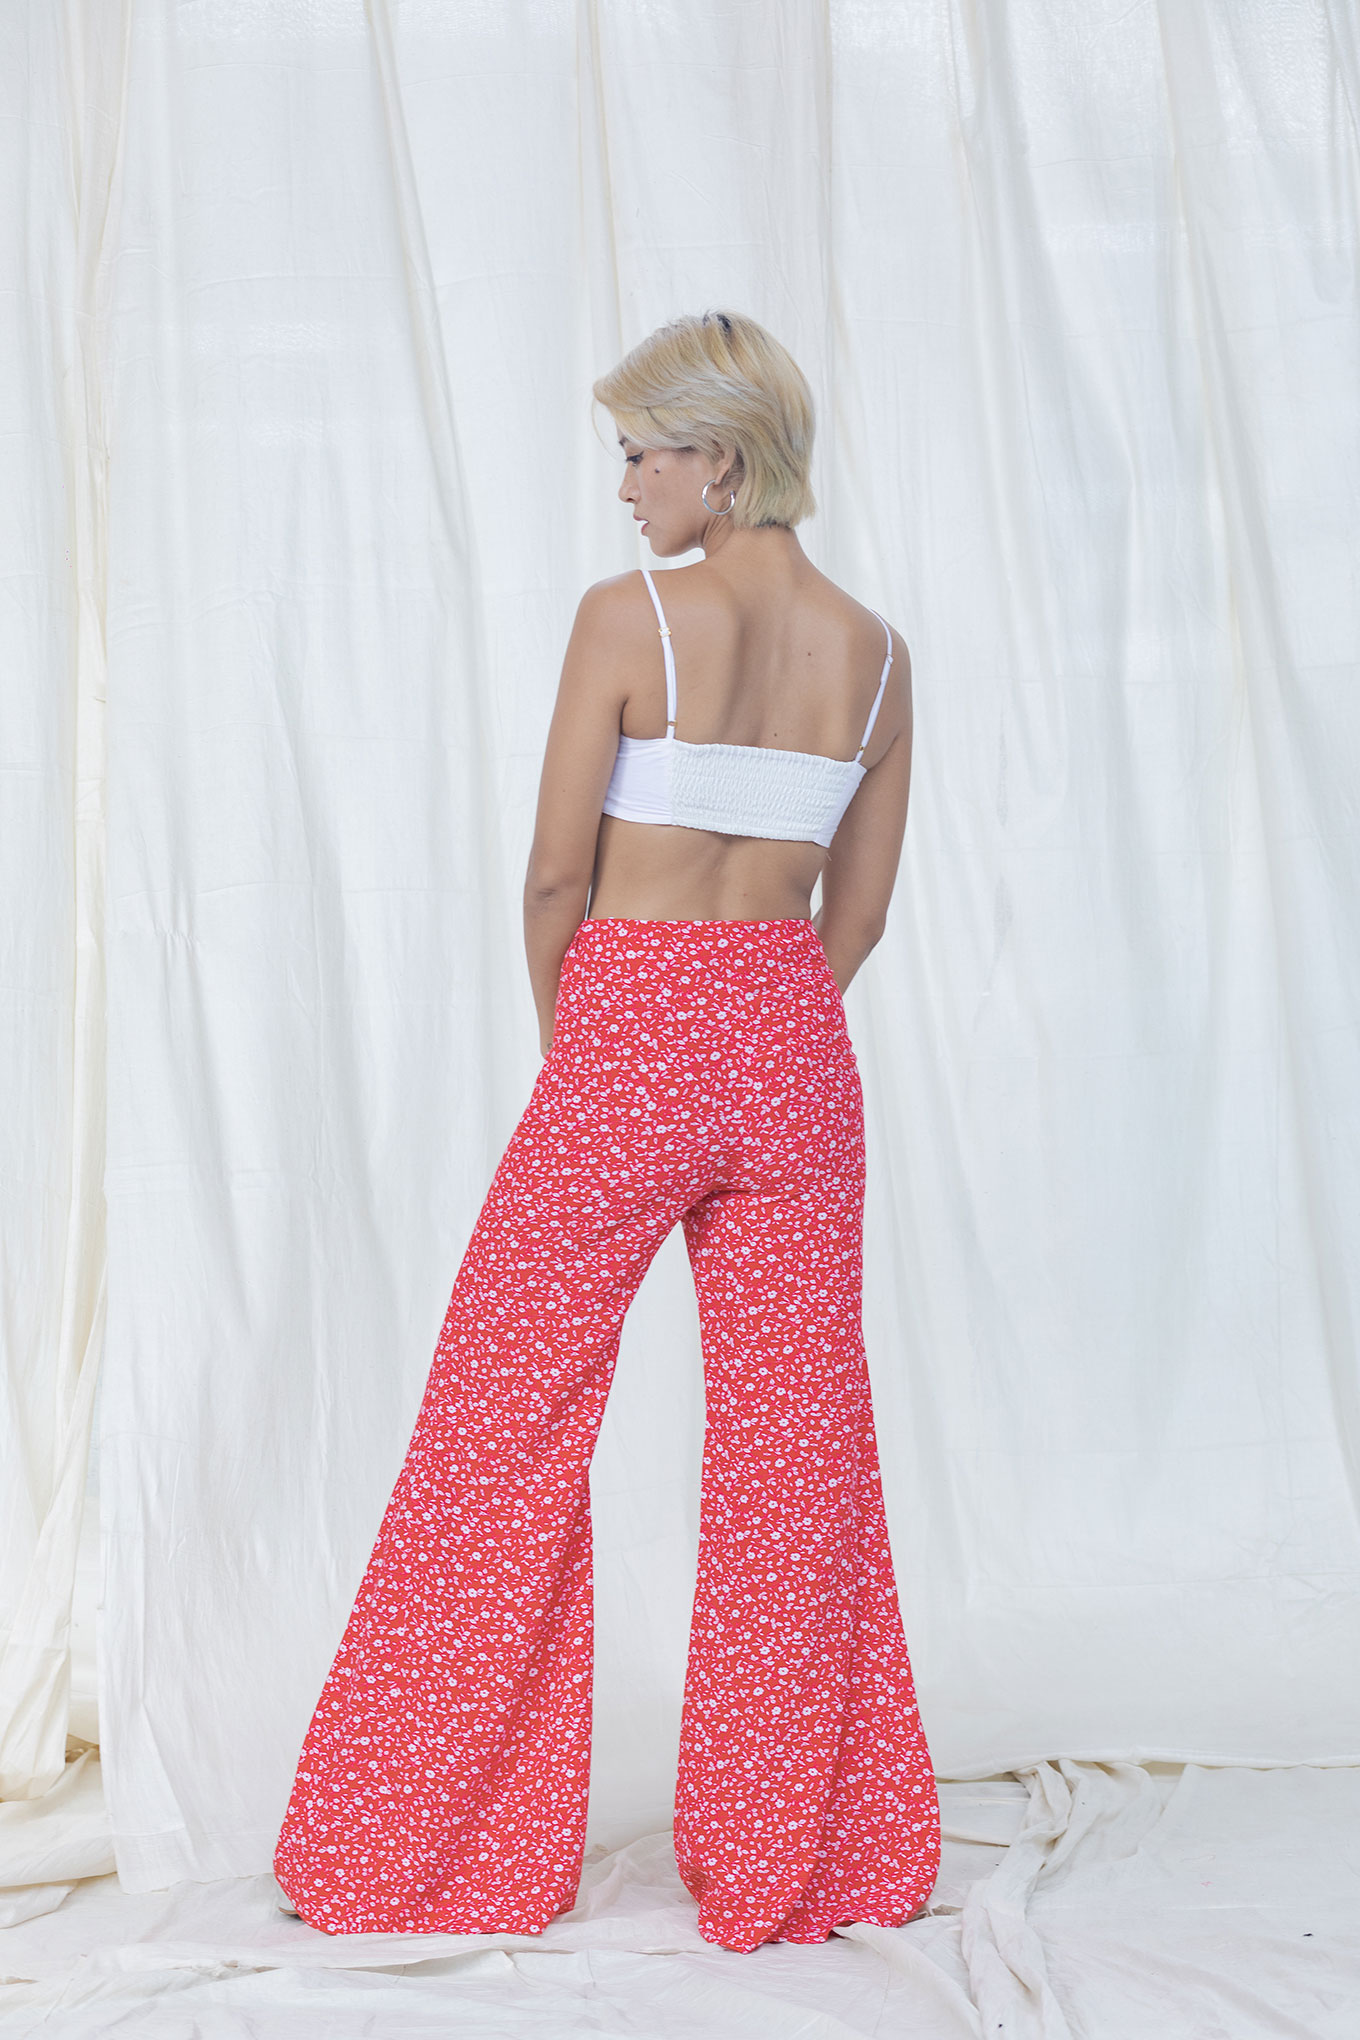 Buy Red And White Floral High Waist Bell Bottom Pants Online